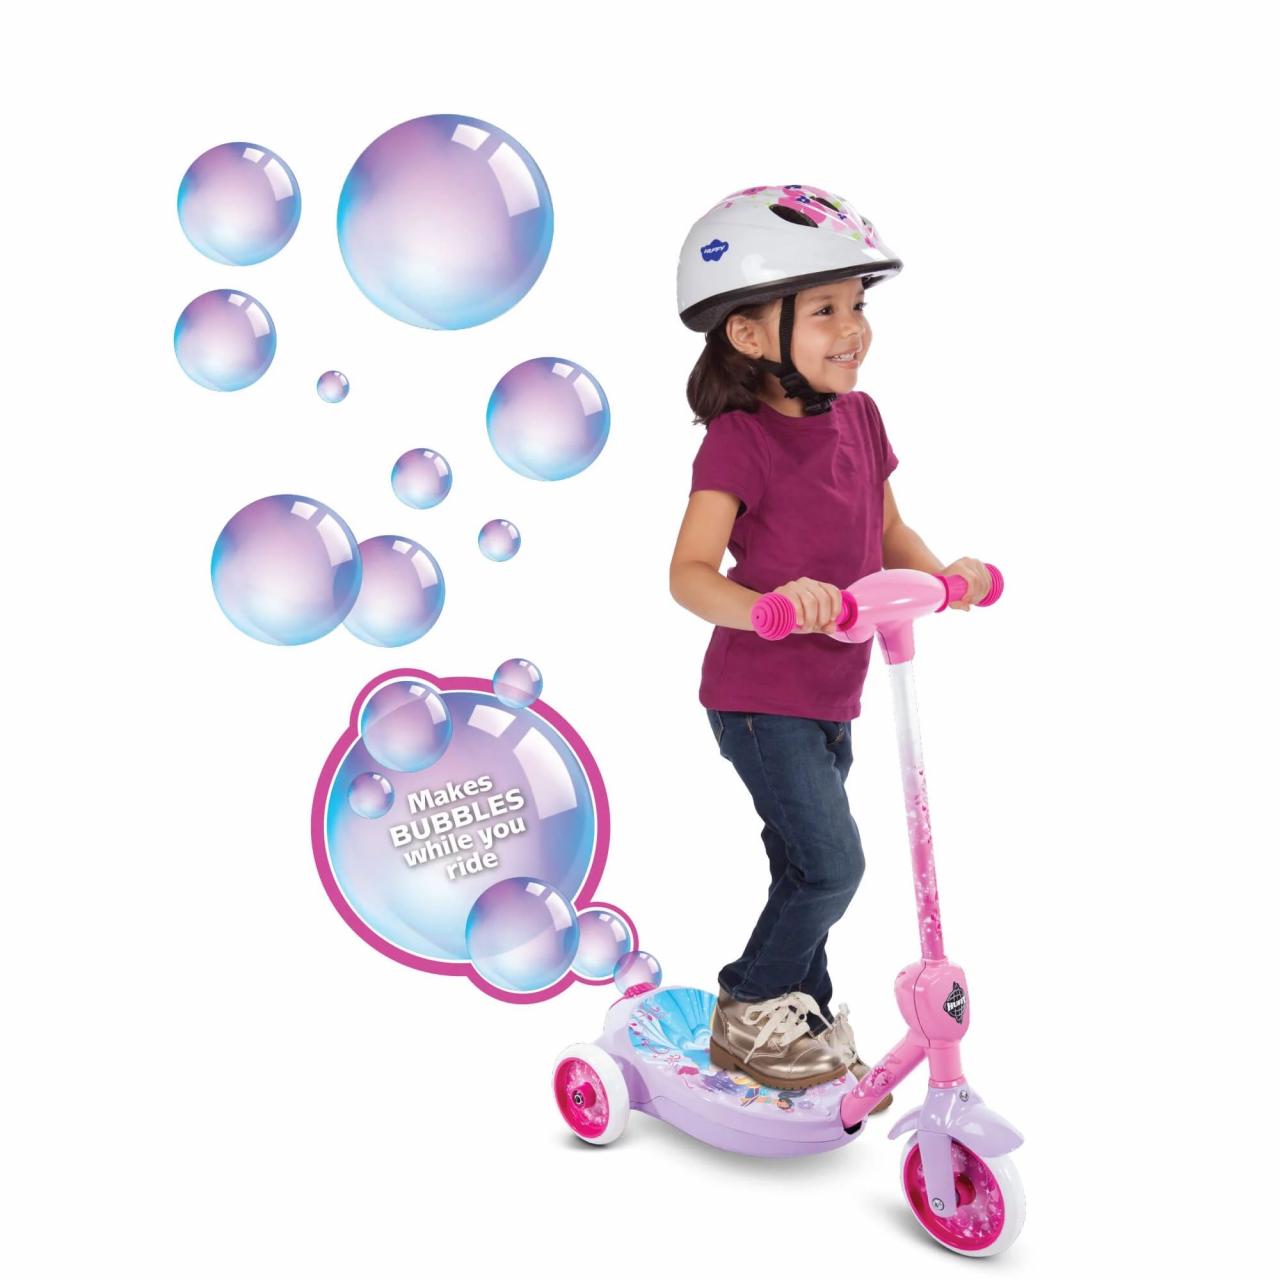 Disney Princess Girls’ 6V Electric 3Wheel Bubble Scooter by Huffy